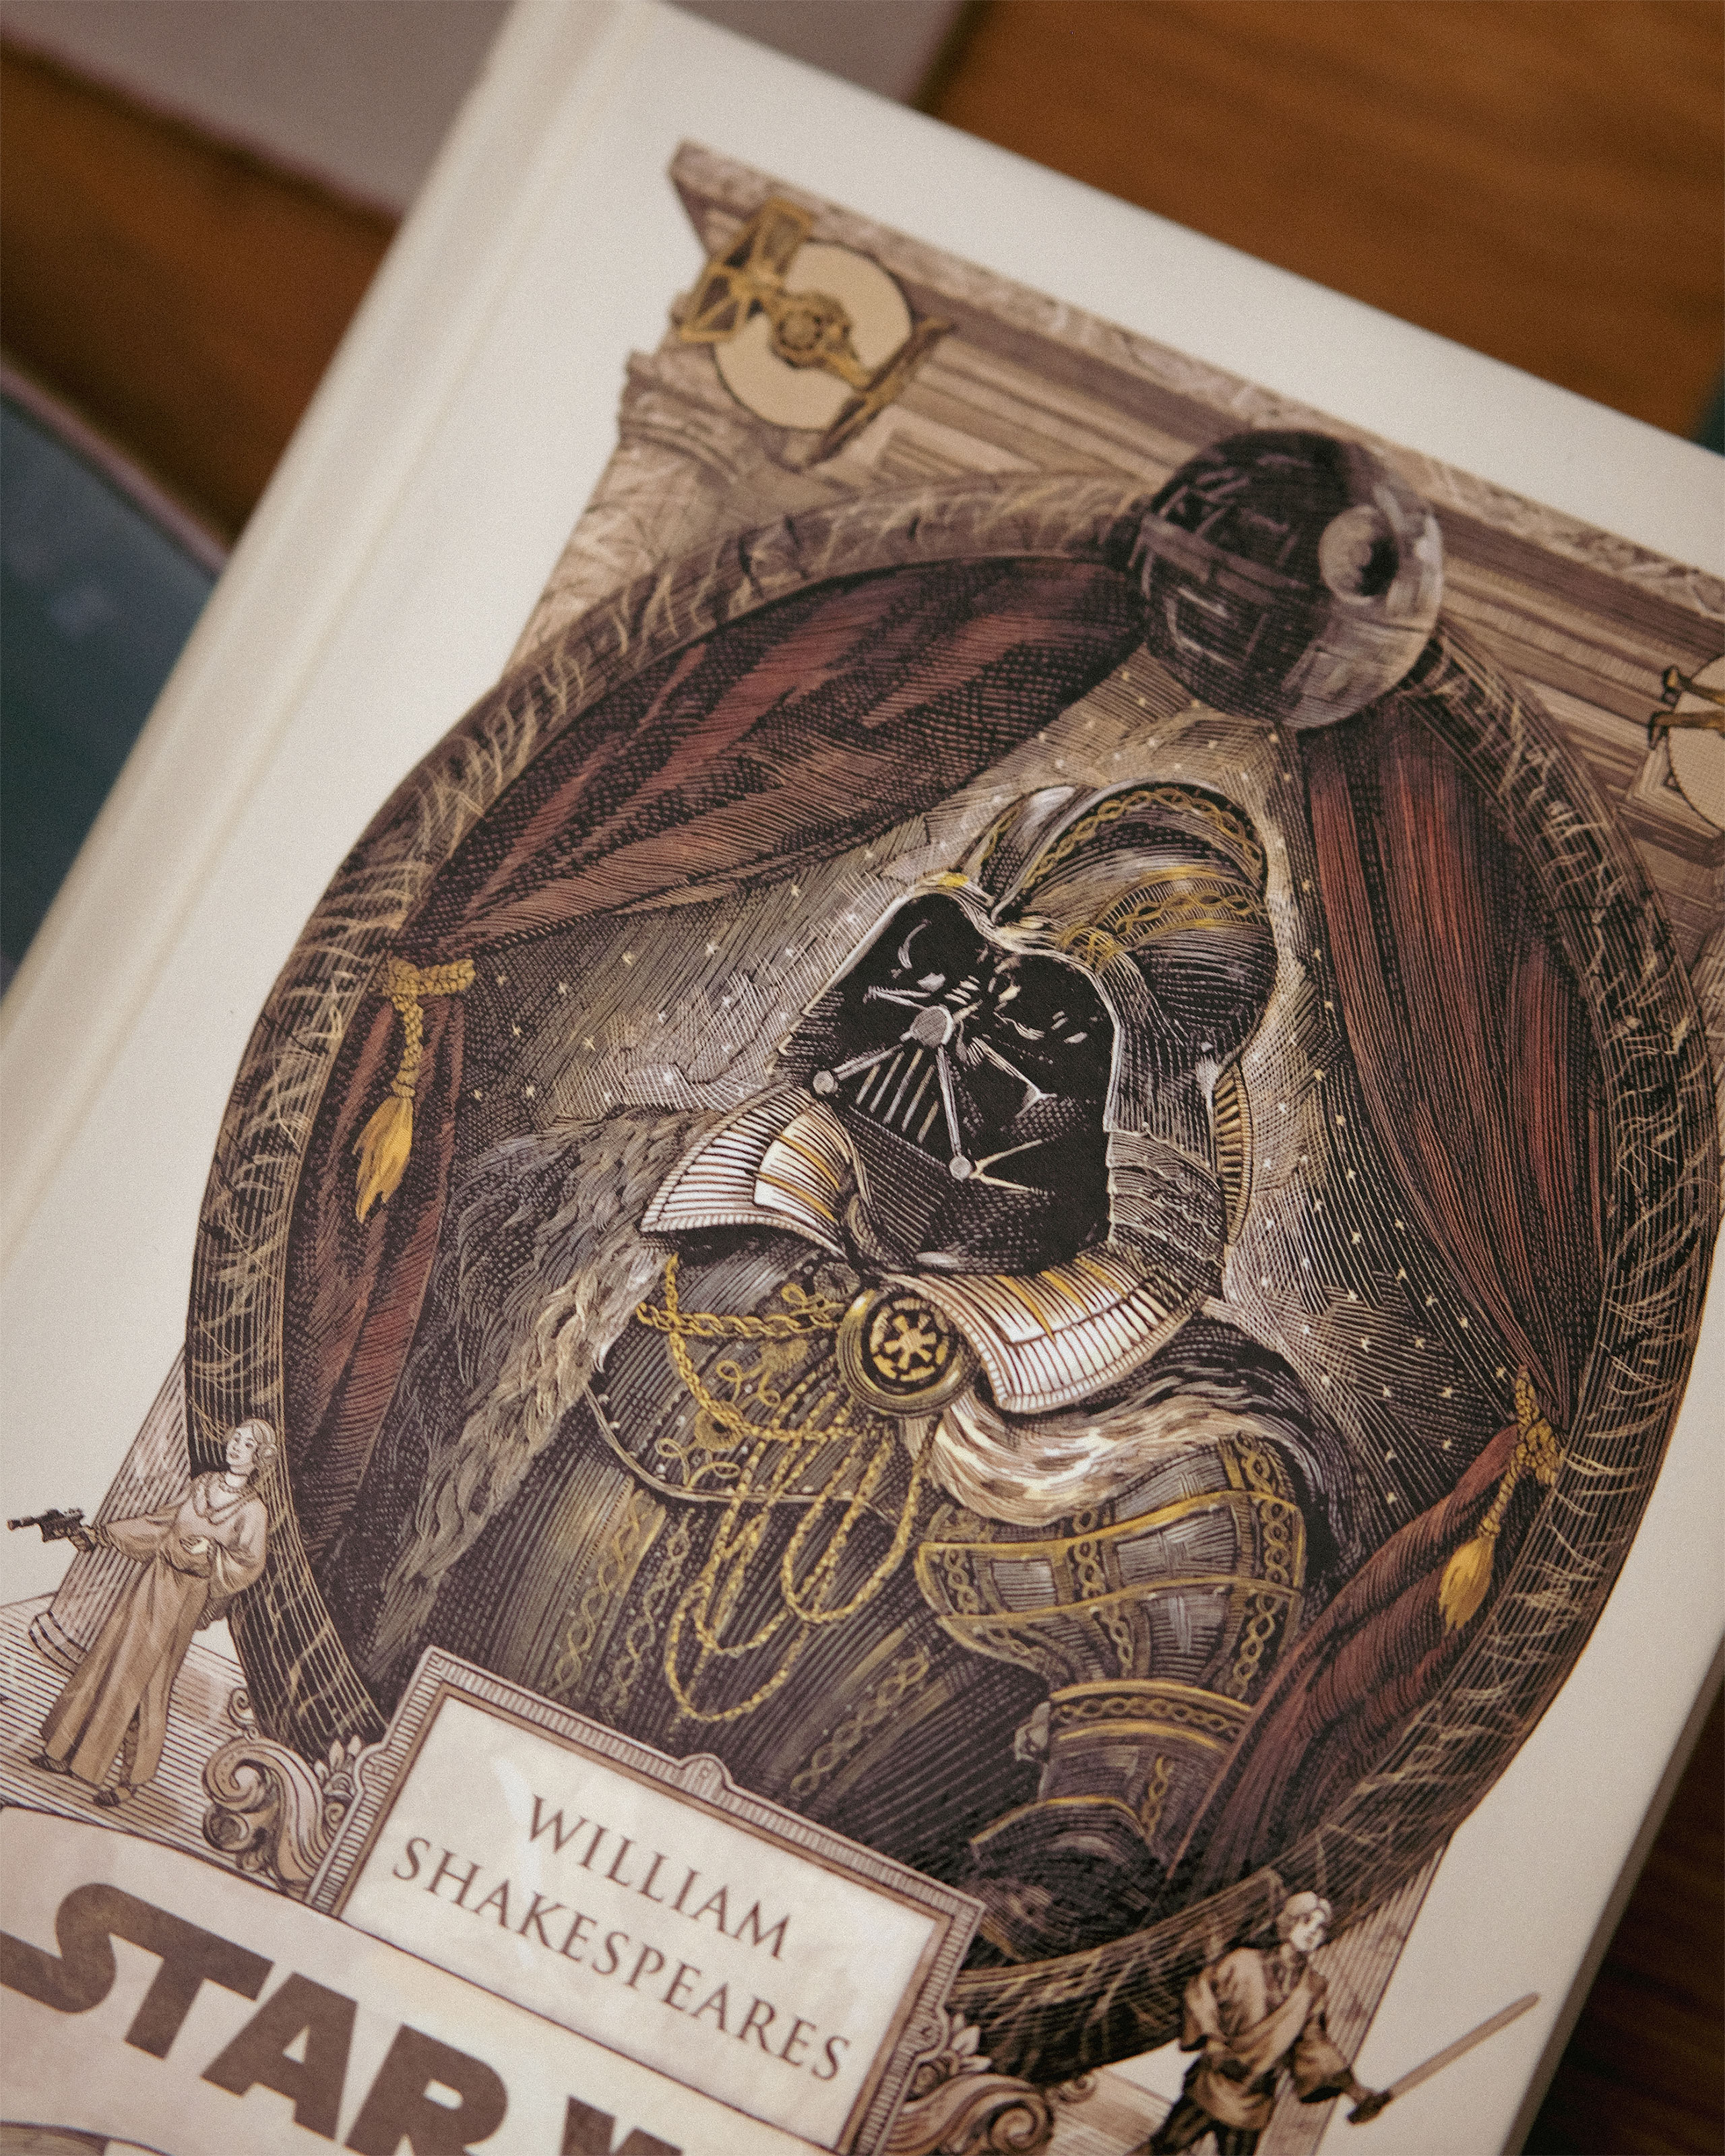 William Shakespeare's Star Wars - Verily, A New Hope